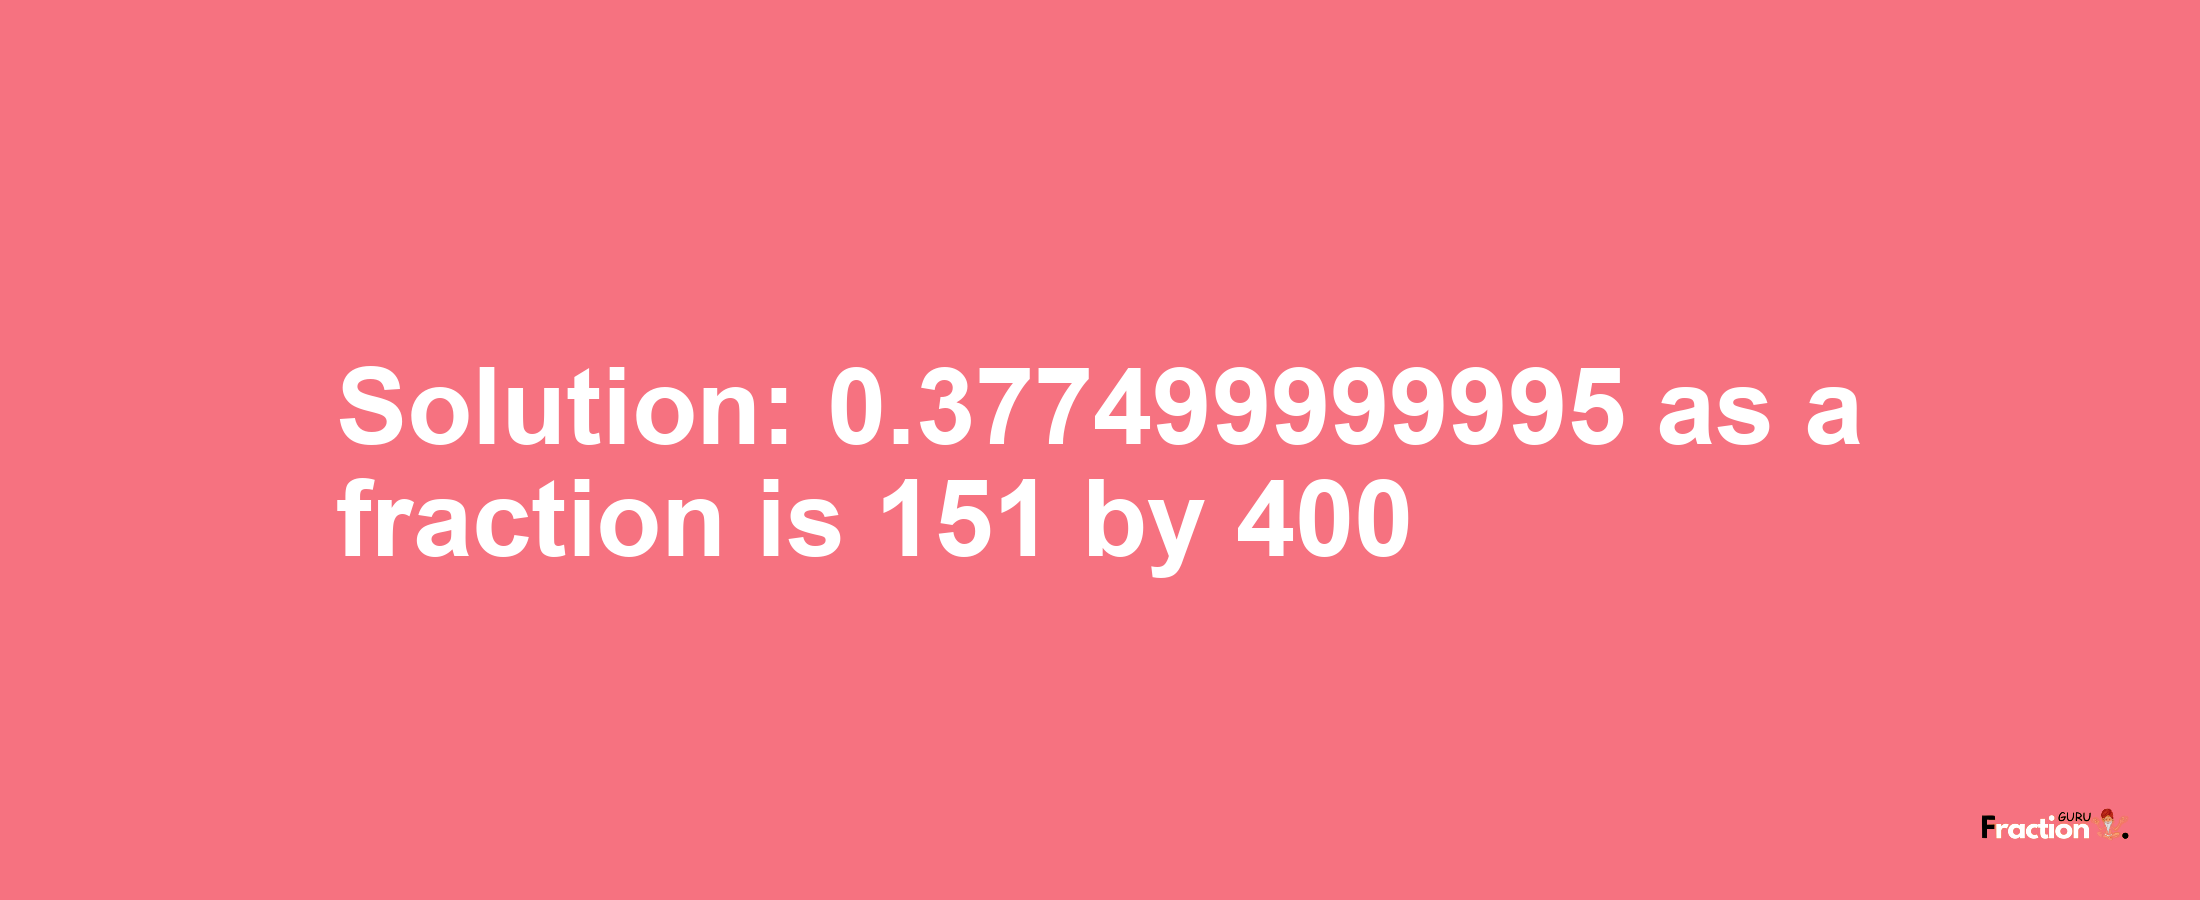 Solution:0.377499999995 as a fraction is 151/400